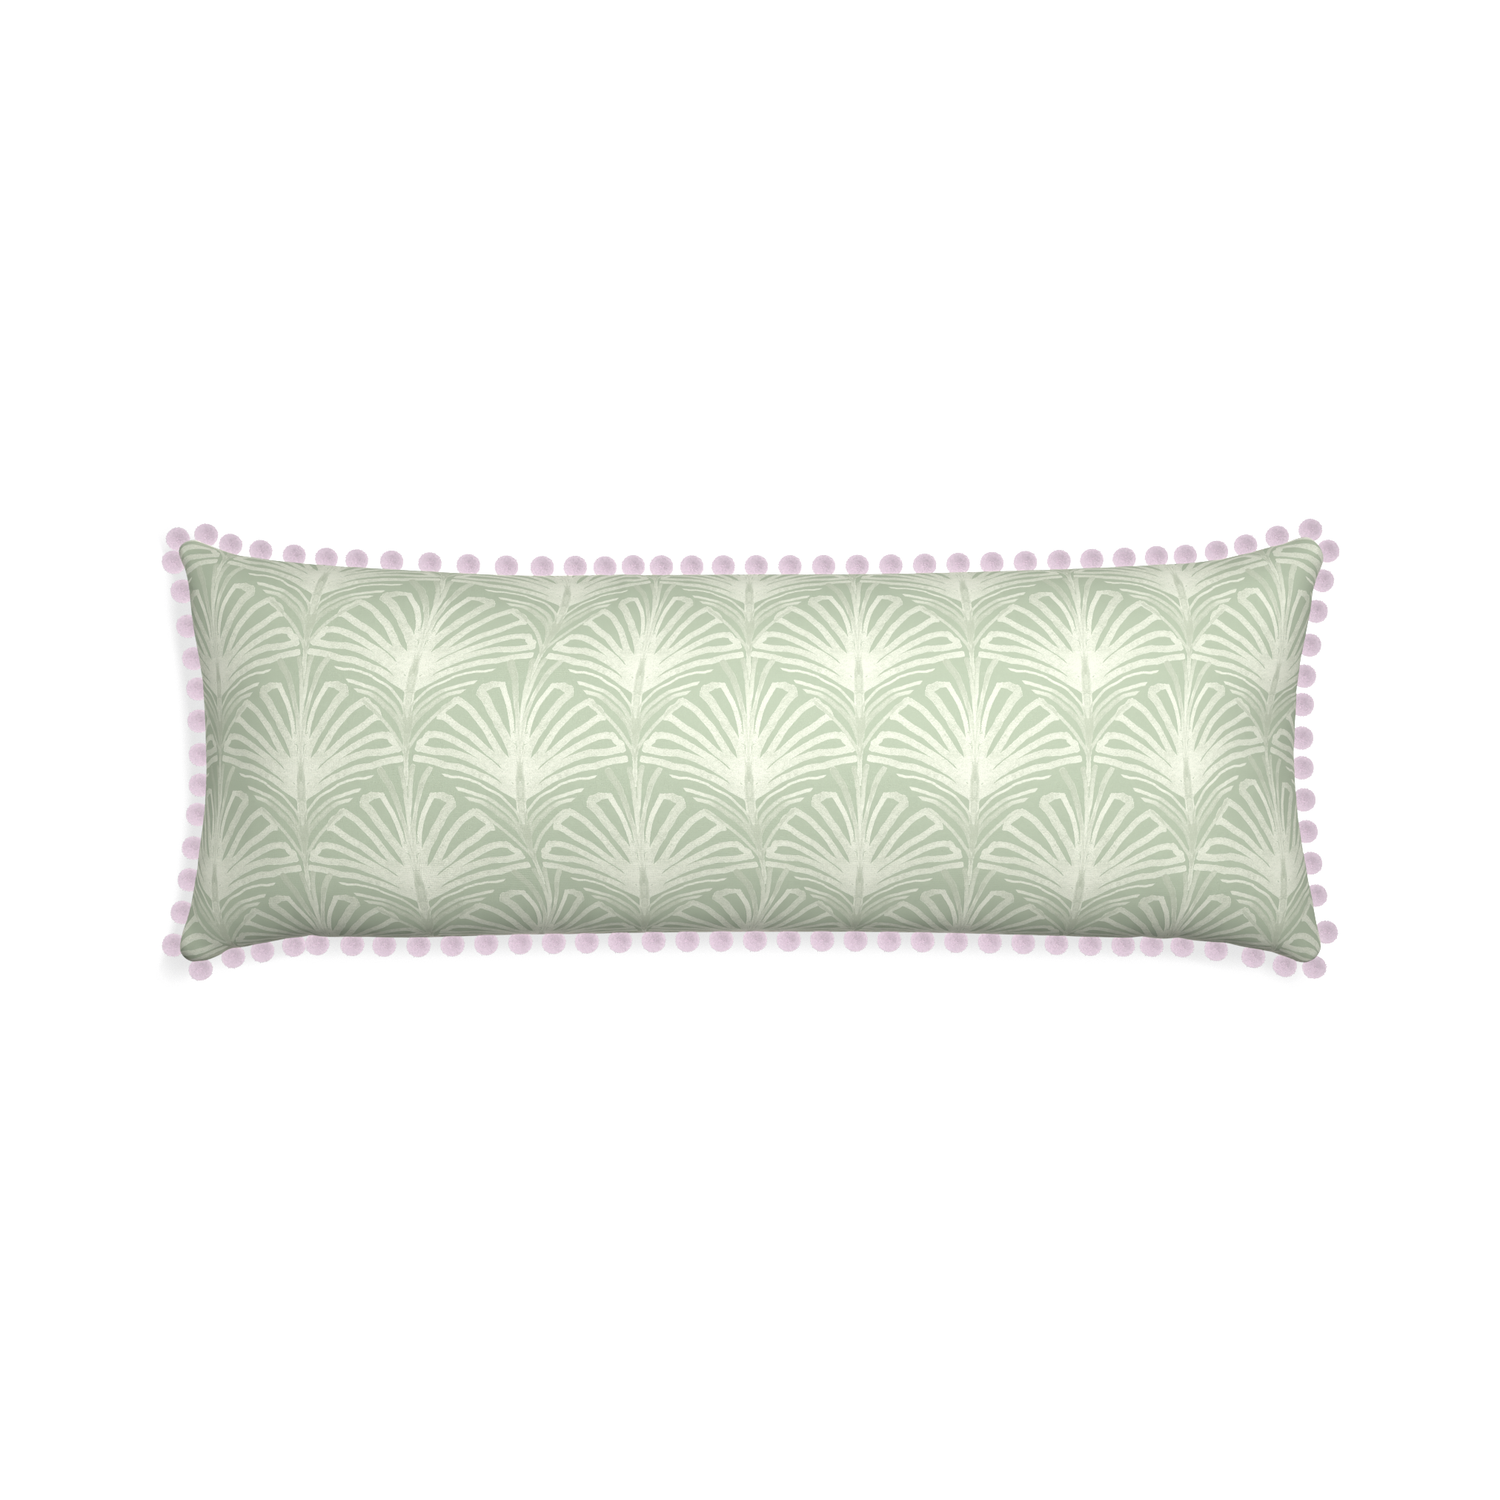 Xl-lumbar suzy sage custom pillow with l on white background